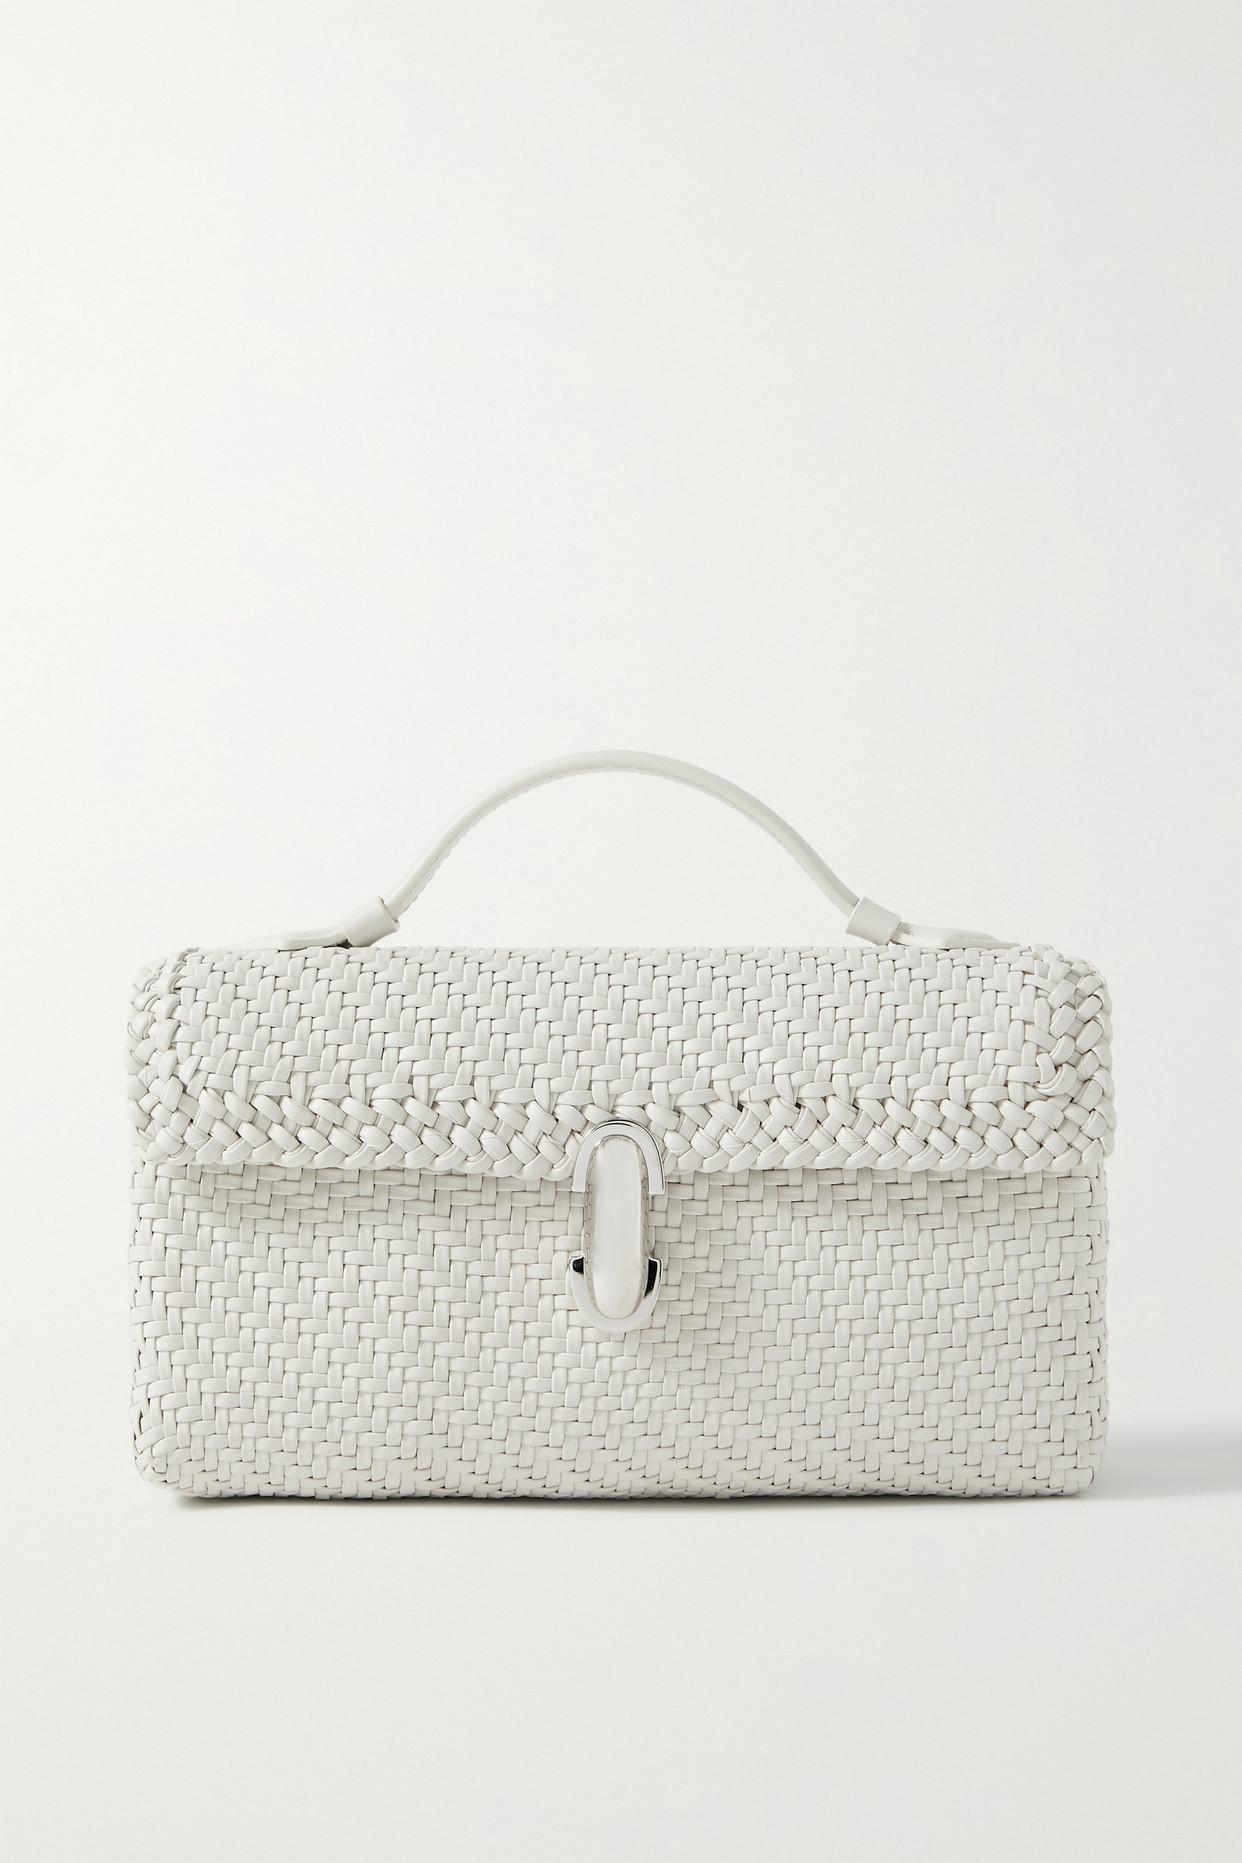 SAVETTE Symmetry Pochette Woven Leather Tote in White | Lyst UK